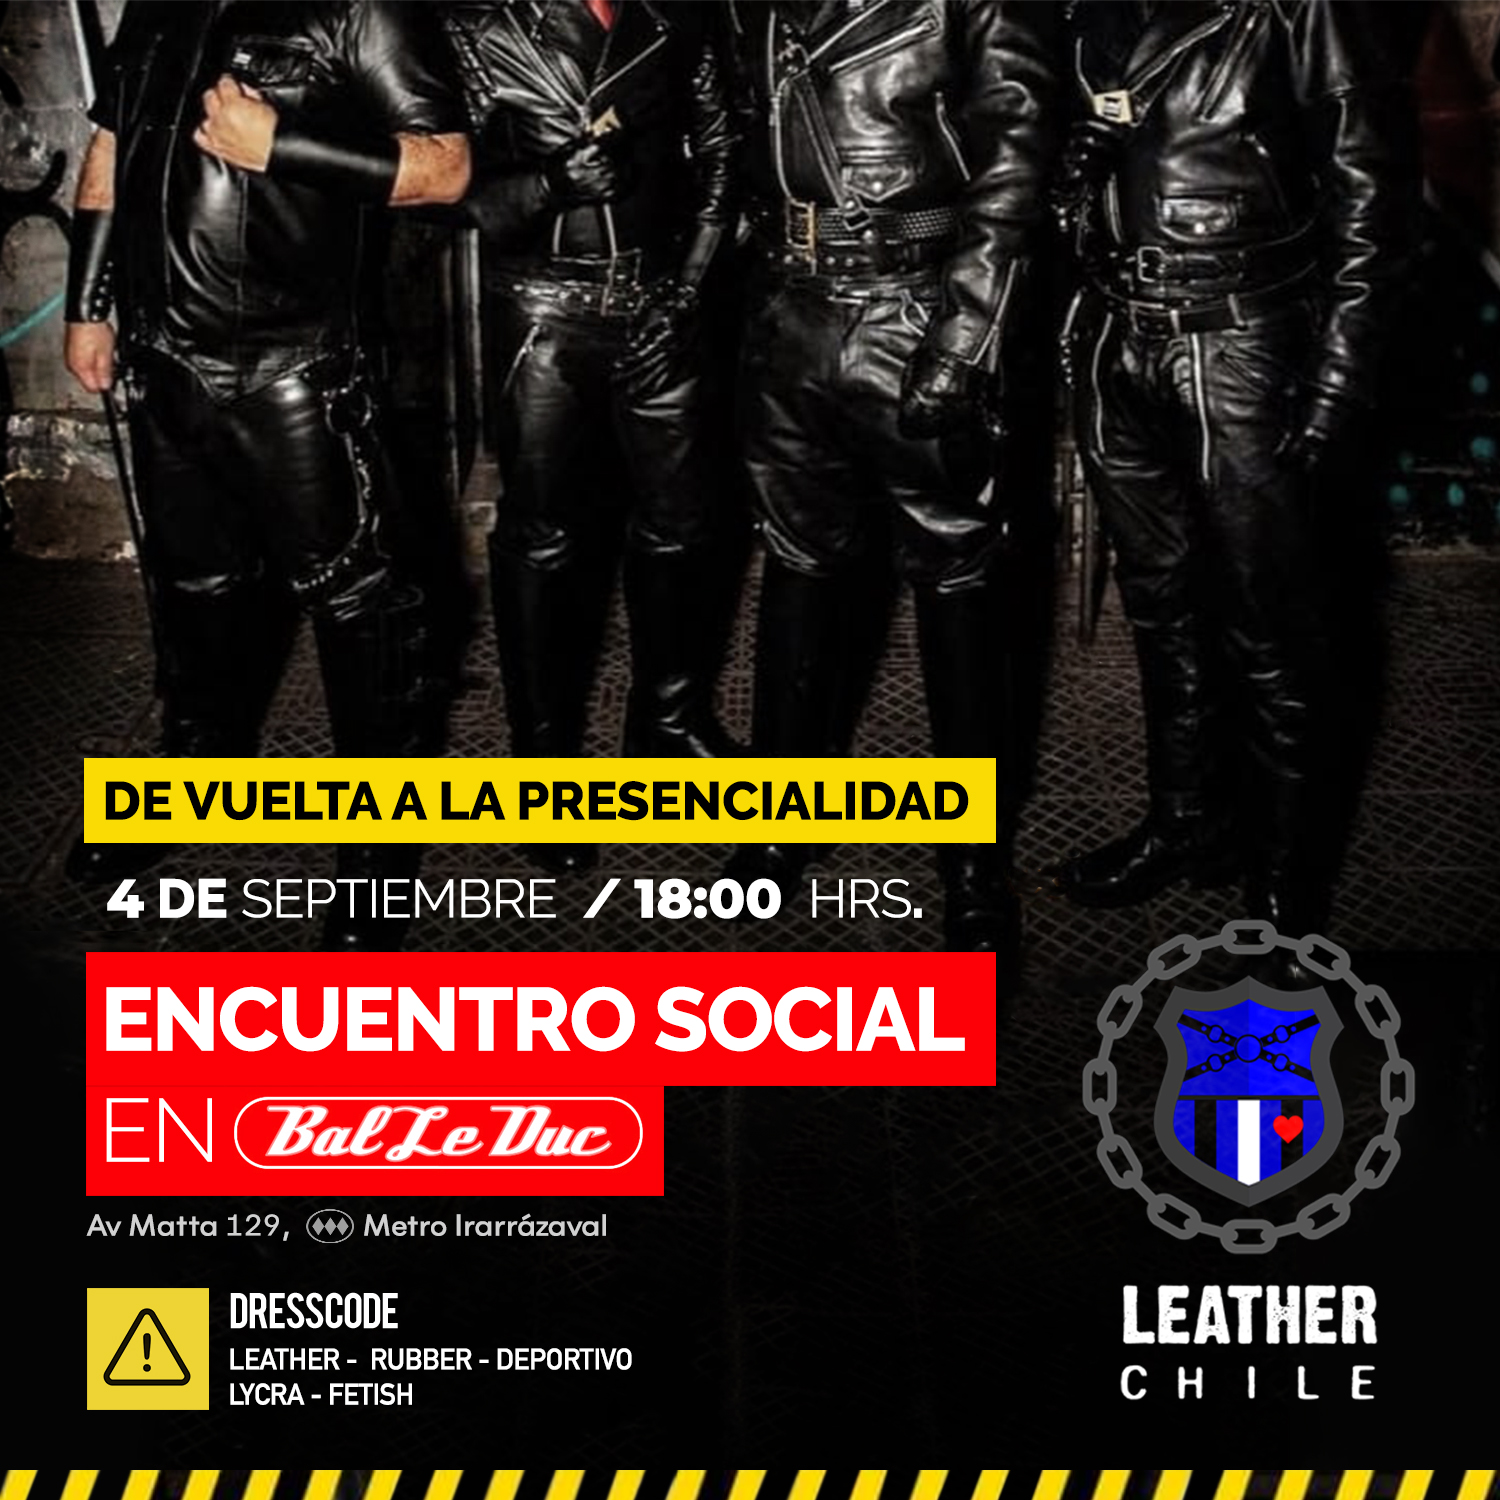 LEATHER CHILE